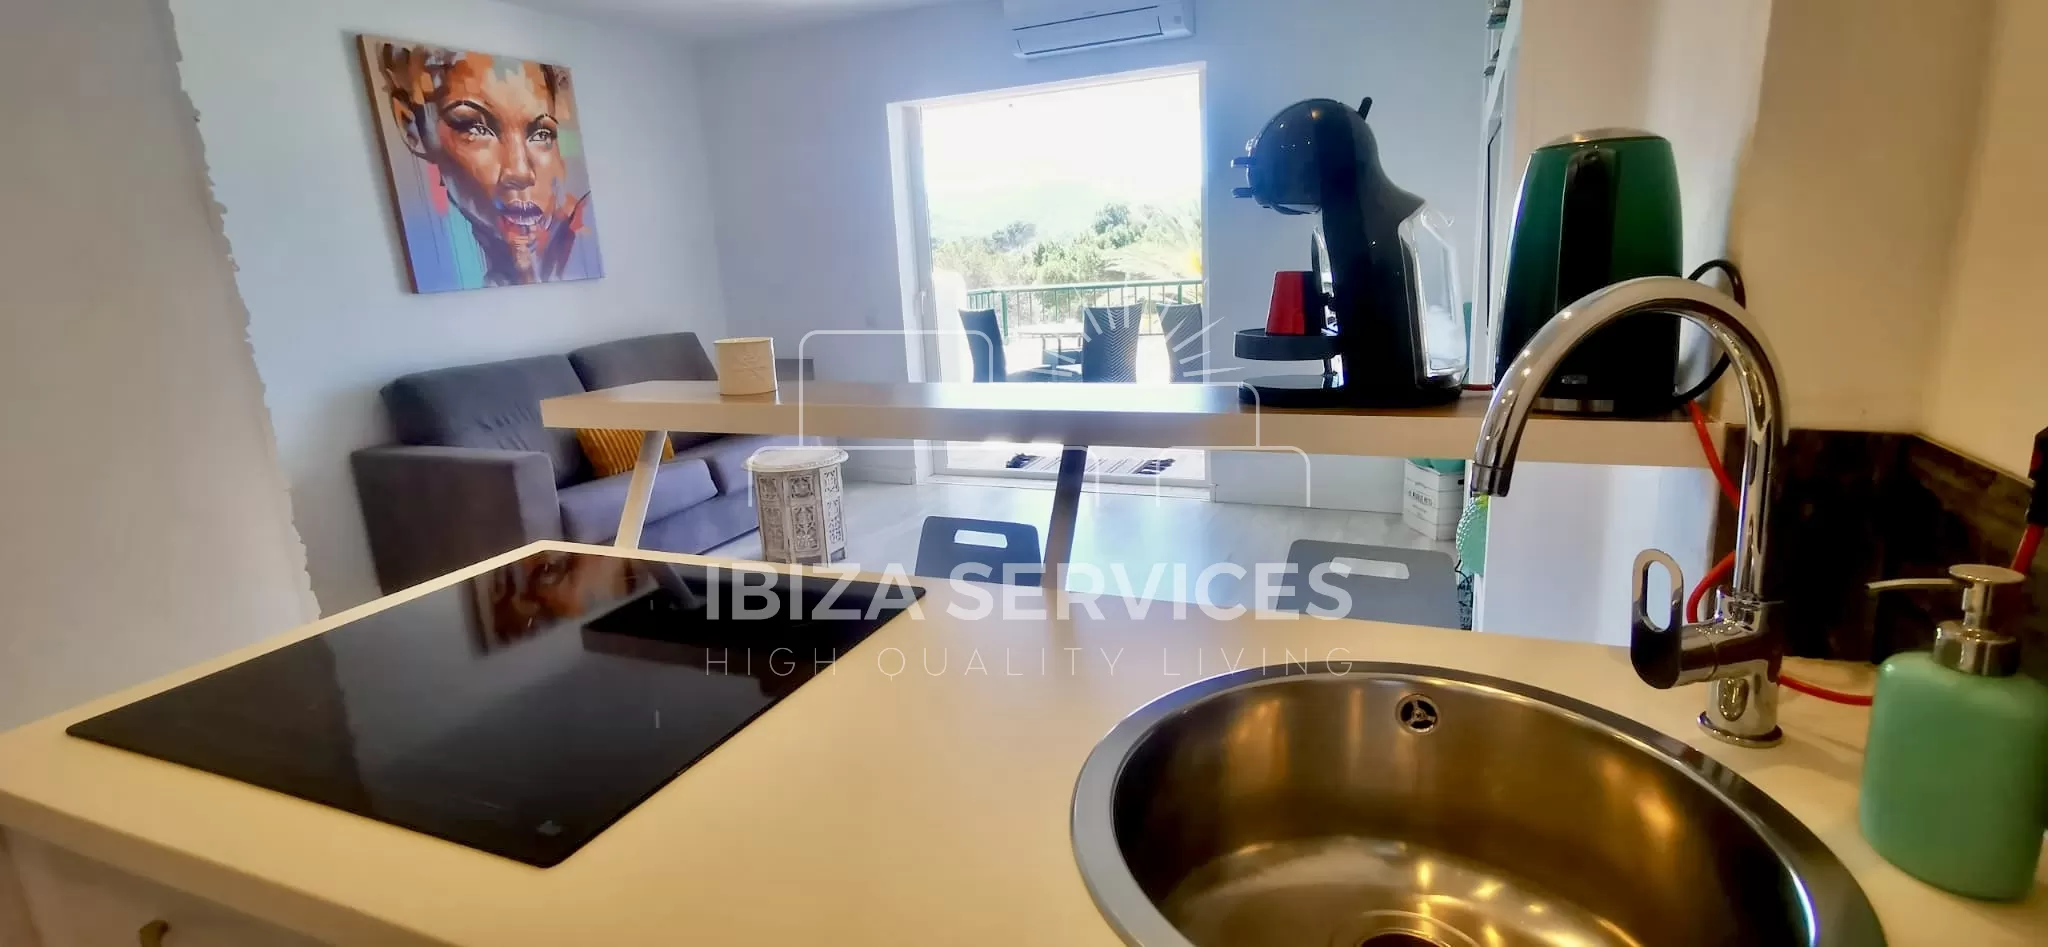 For Sale: Seaside holiday apartment in Cala Coral, Ibiza